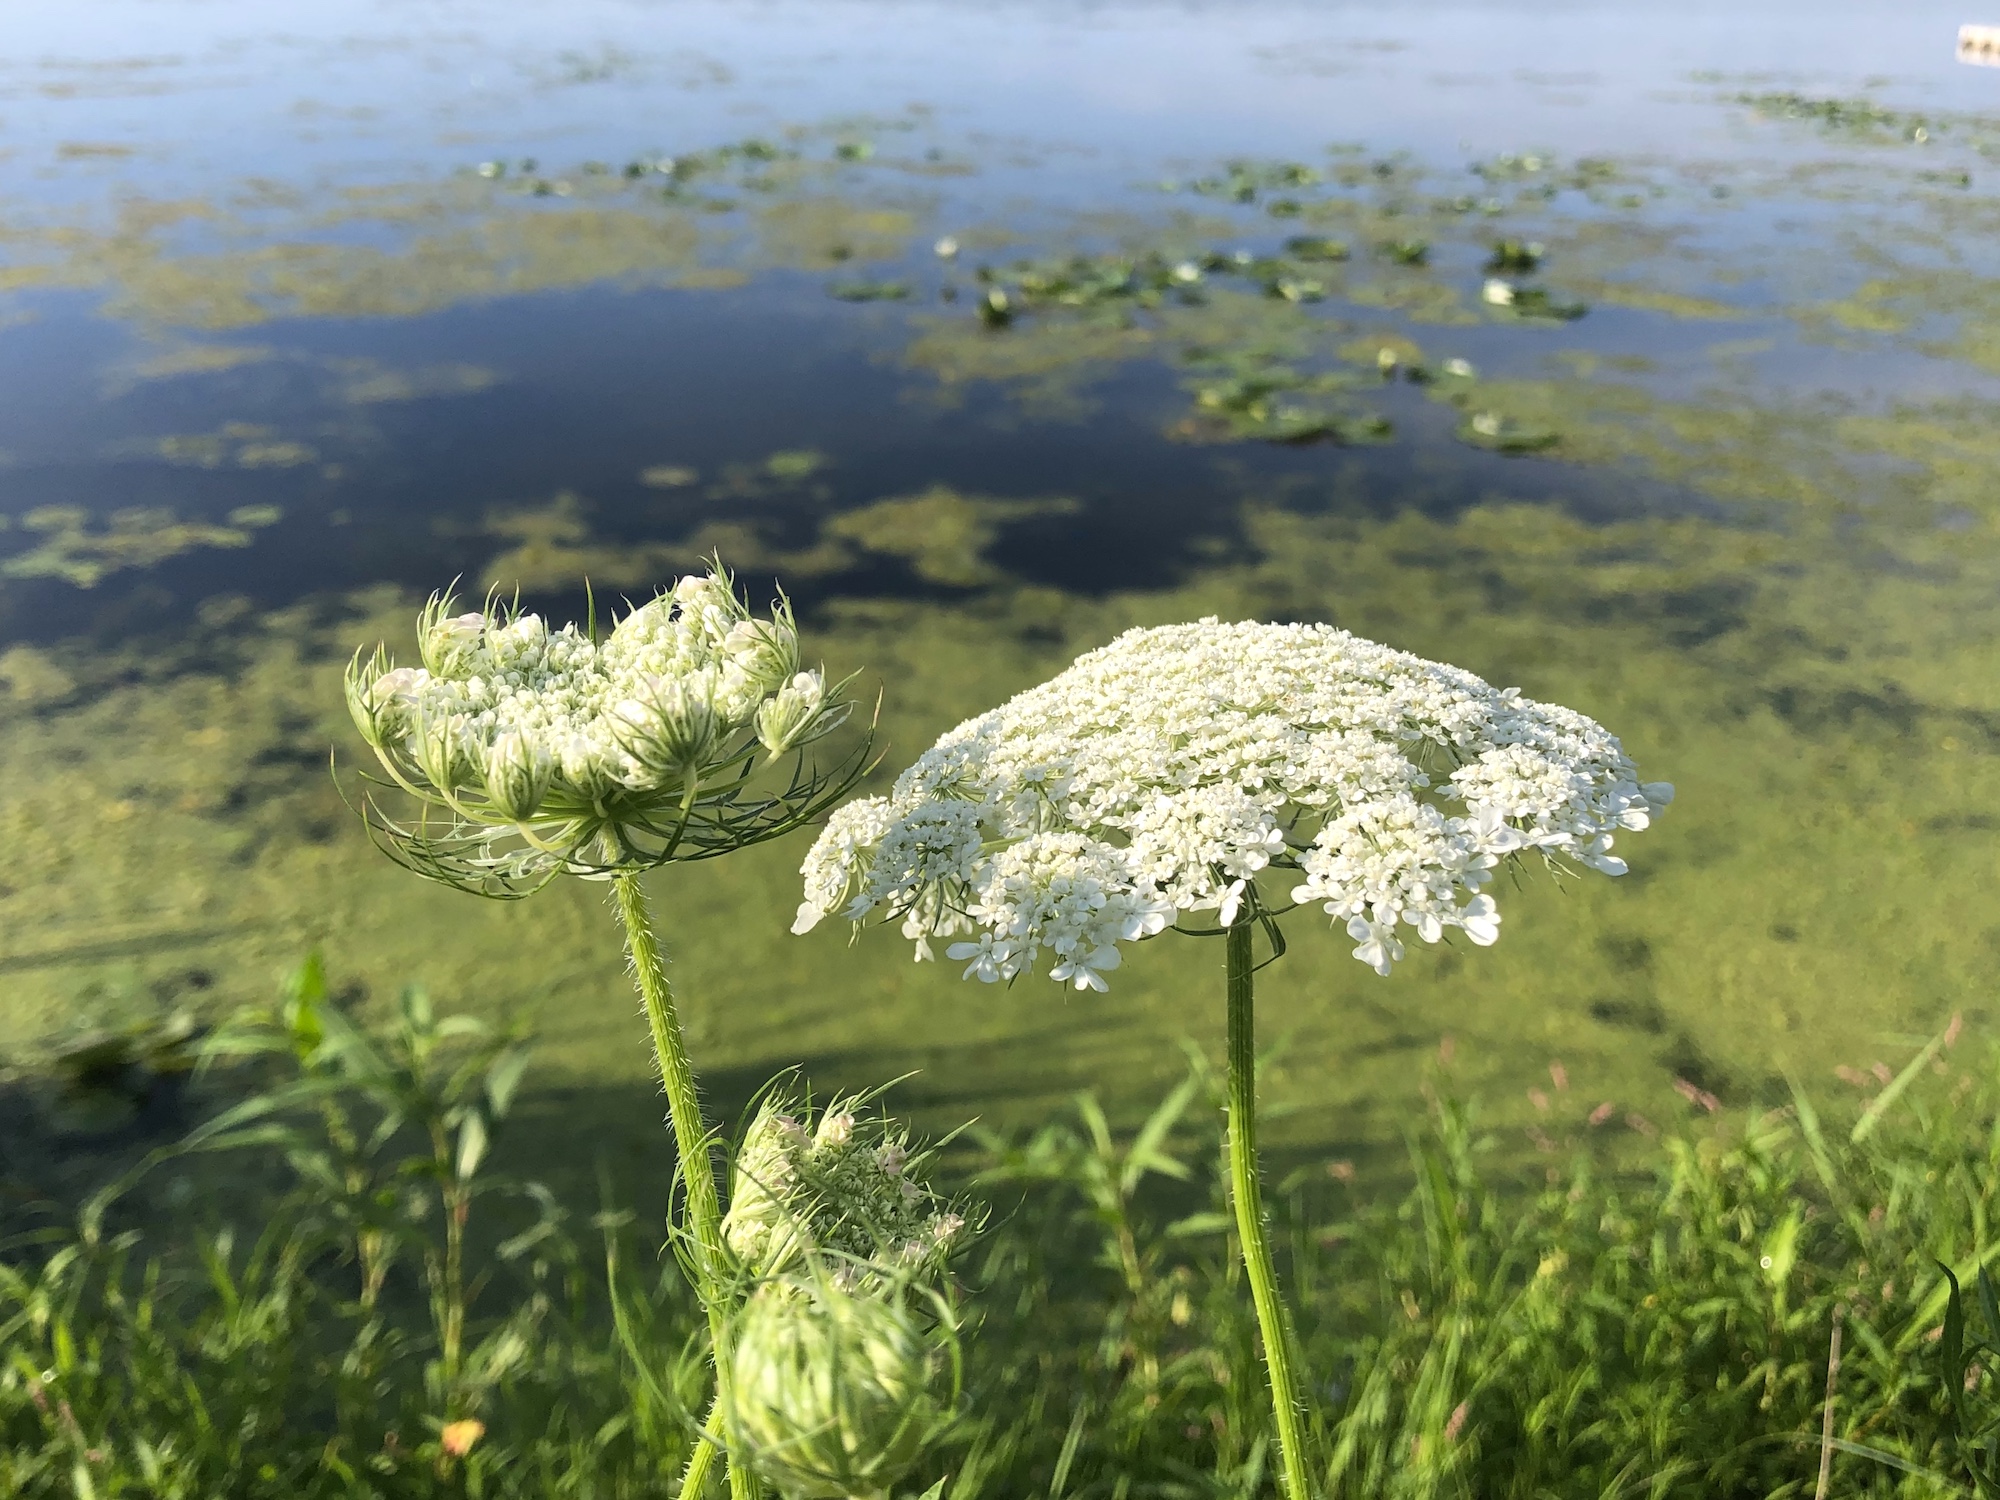 Queen Anne's Lace on shore of Lake Wingra in Wingra Park in Madison, WI on August 23, 2020.